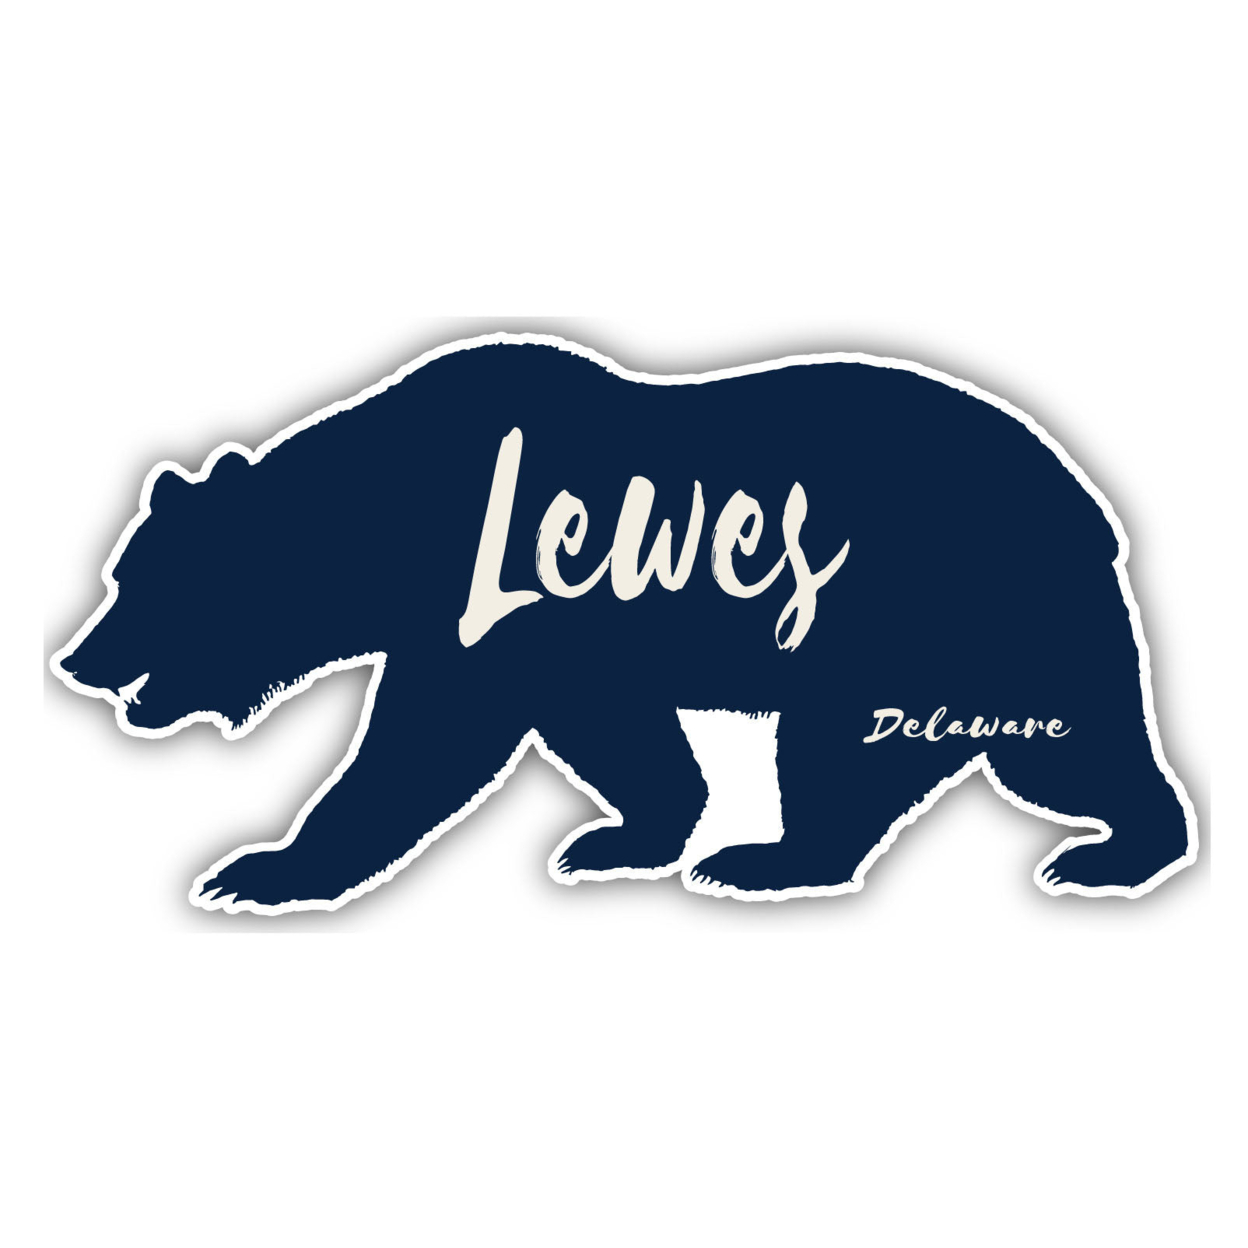 Lewes Delaware Souvenir Decorative Stickers (Choose Theme And Size) - 4-Inch, Great Outdoors